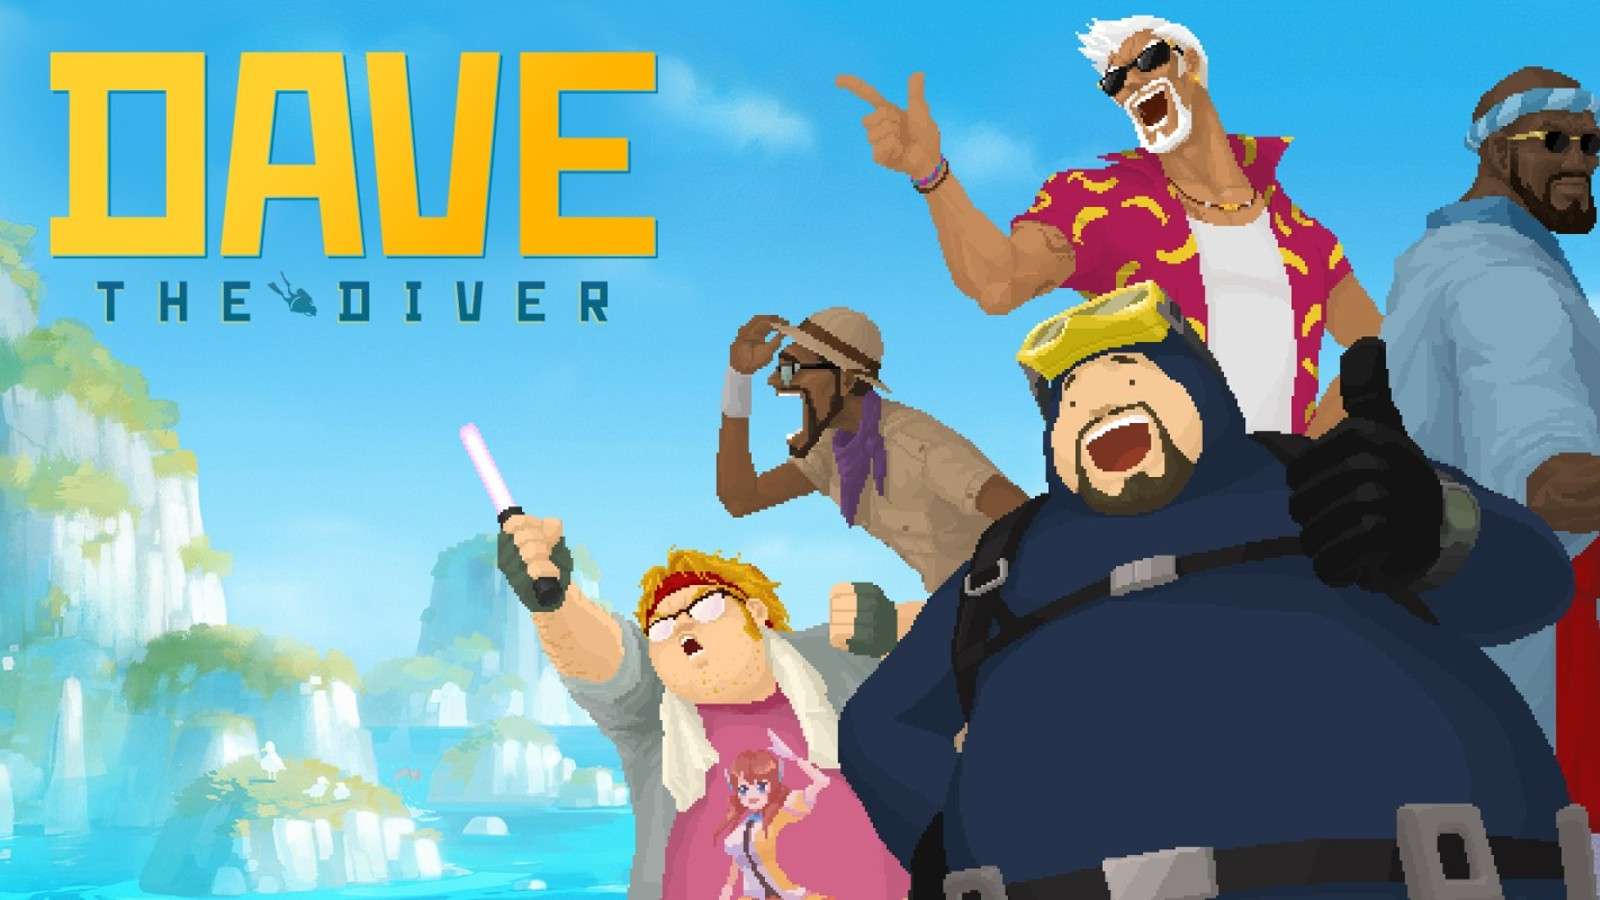 An image of Dave the Diver keyart.